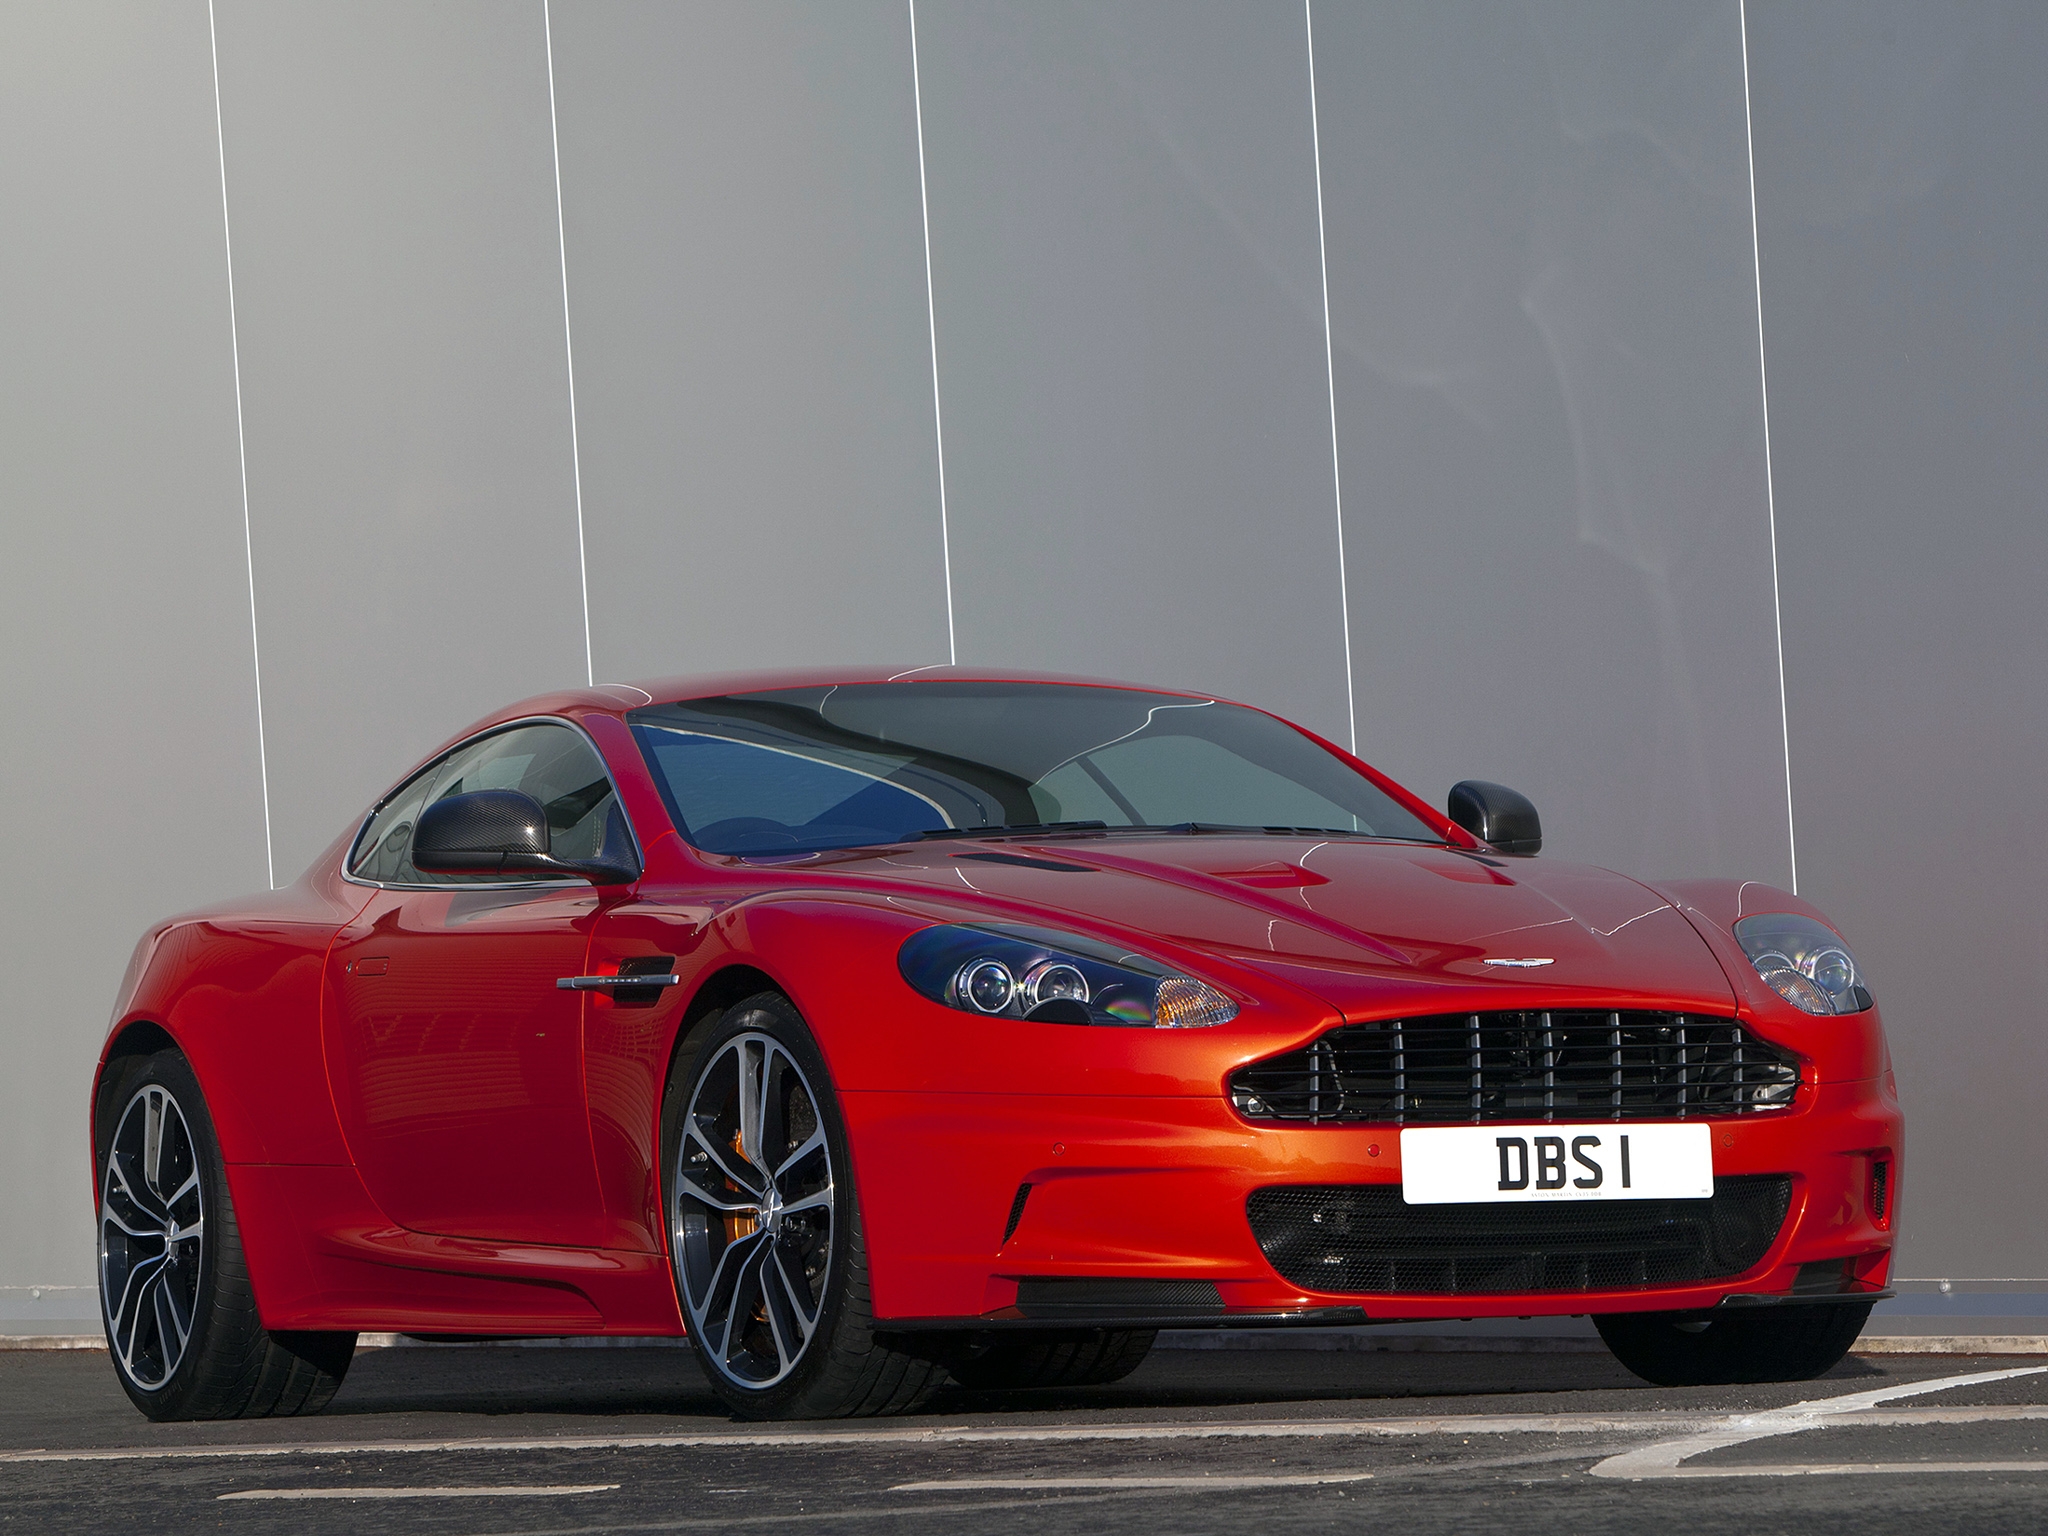 sports, aston martin, cars, red, front view, dbs, 2011